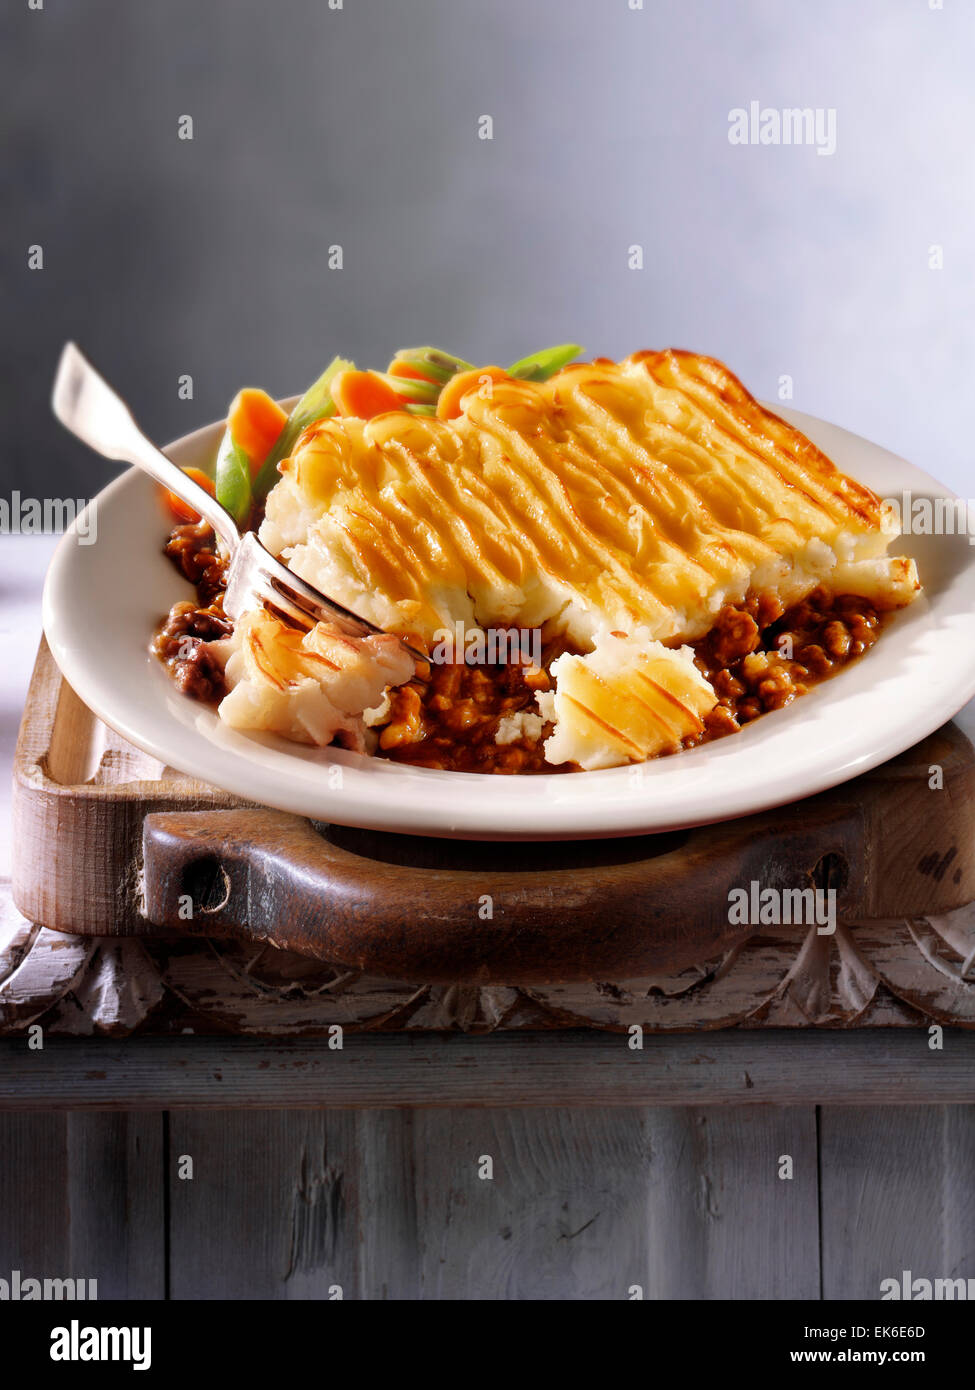 prepared minced Lamb meat Shepherd's Pie recipe served on a plate in a rustic table setting Stock Photo